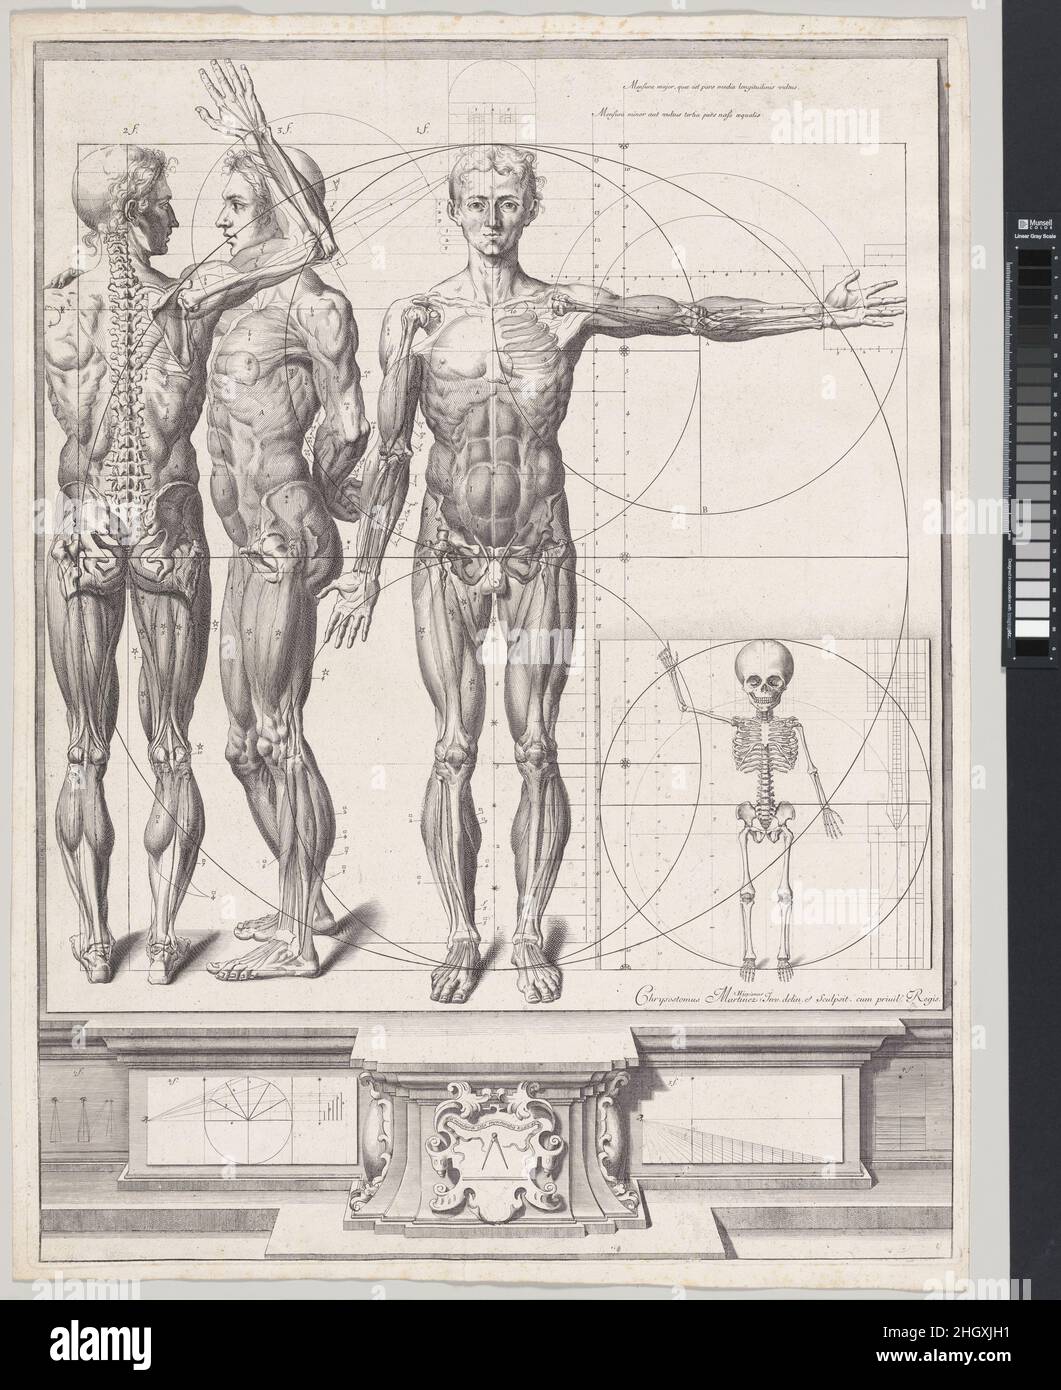 Plate for the ‘Atlas Anatomico’ (unpublished) Plate ca. 1680–94; printed 1740 Crisóstomo Alejandrino José Martínez y Sorli Frontal, side and rear view of an adult man, depicted with a view of the muscular and bone structure visible through the skin. Measurements and proportions are indicated with circles, lines, scales and reference numbers. To the right, the skeleton of a child is depicted in frontal view with its proper measurements and proportions. The whole is depicted on a blank sheet or plate suggested in trompe-l’oeil and placed above a pedestal upon which further perspectival diagrams Stock Photo